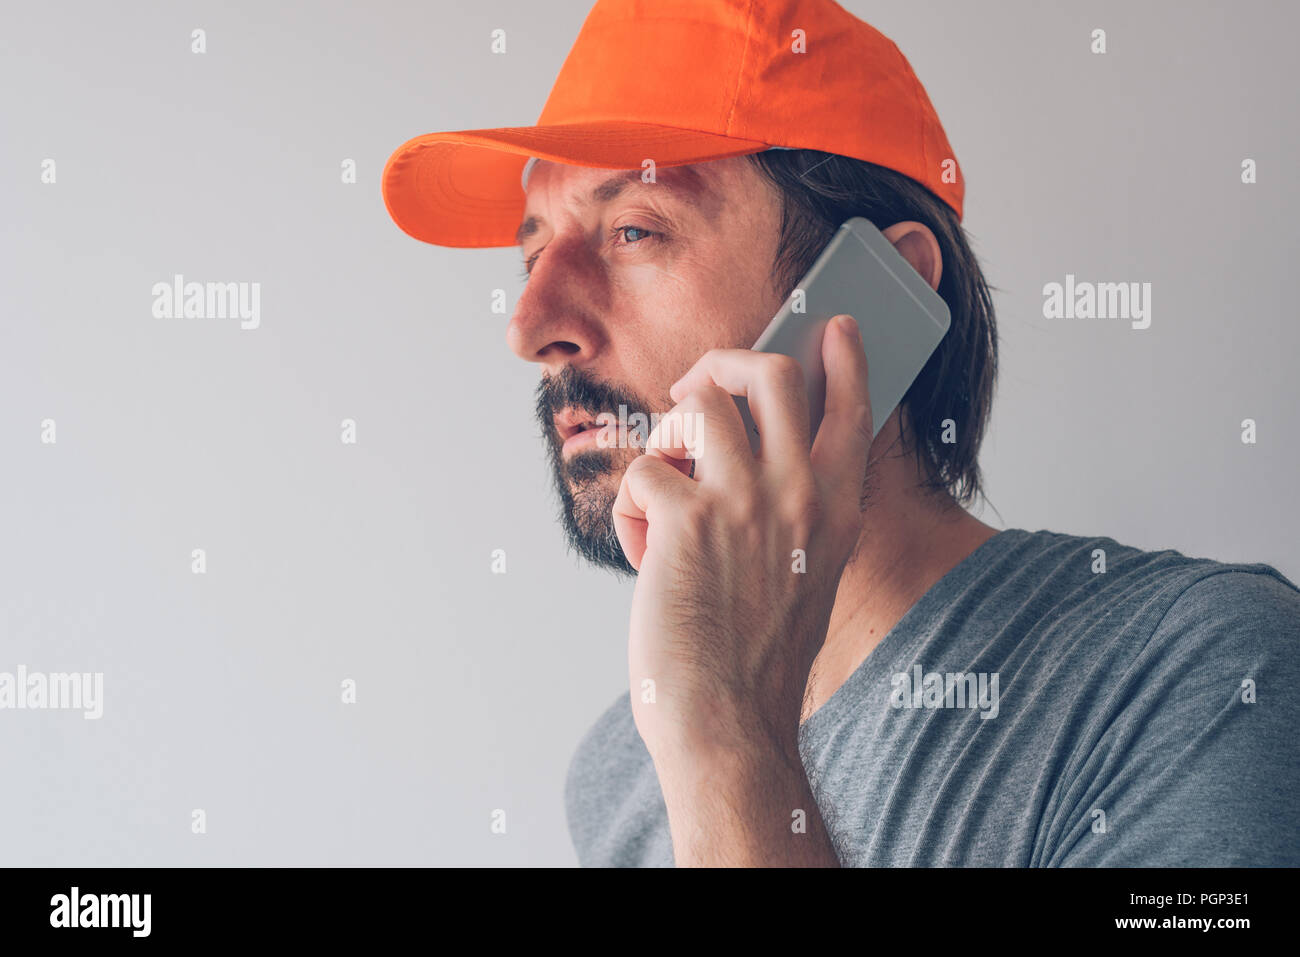 Man with baseball cap talking on smartphone, communication and connectivity concept Stock Photo